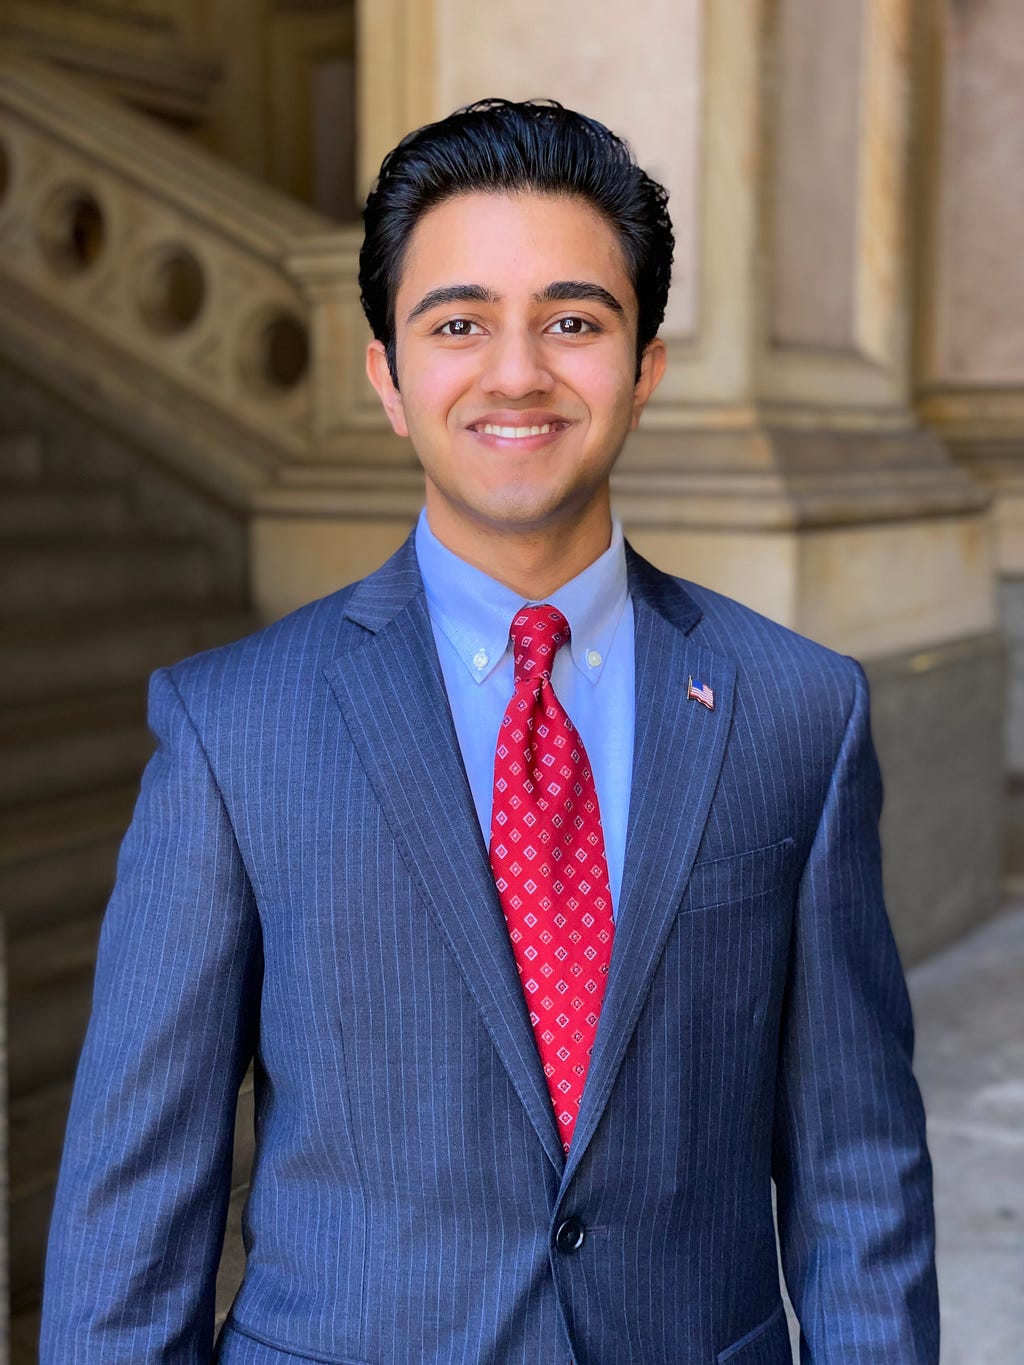 A young man wearing a pinstriped blue suit with a red tie and American flag pin poses with a smile for a picture in City Hall.